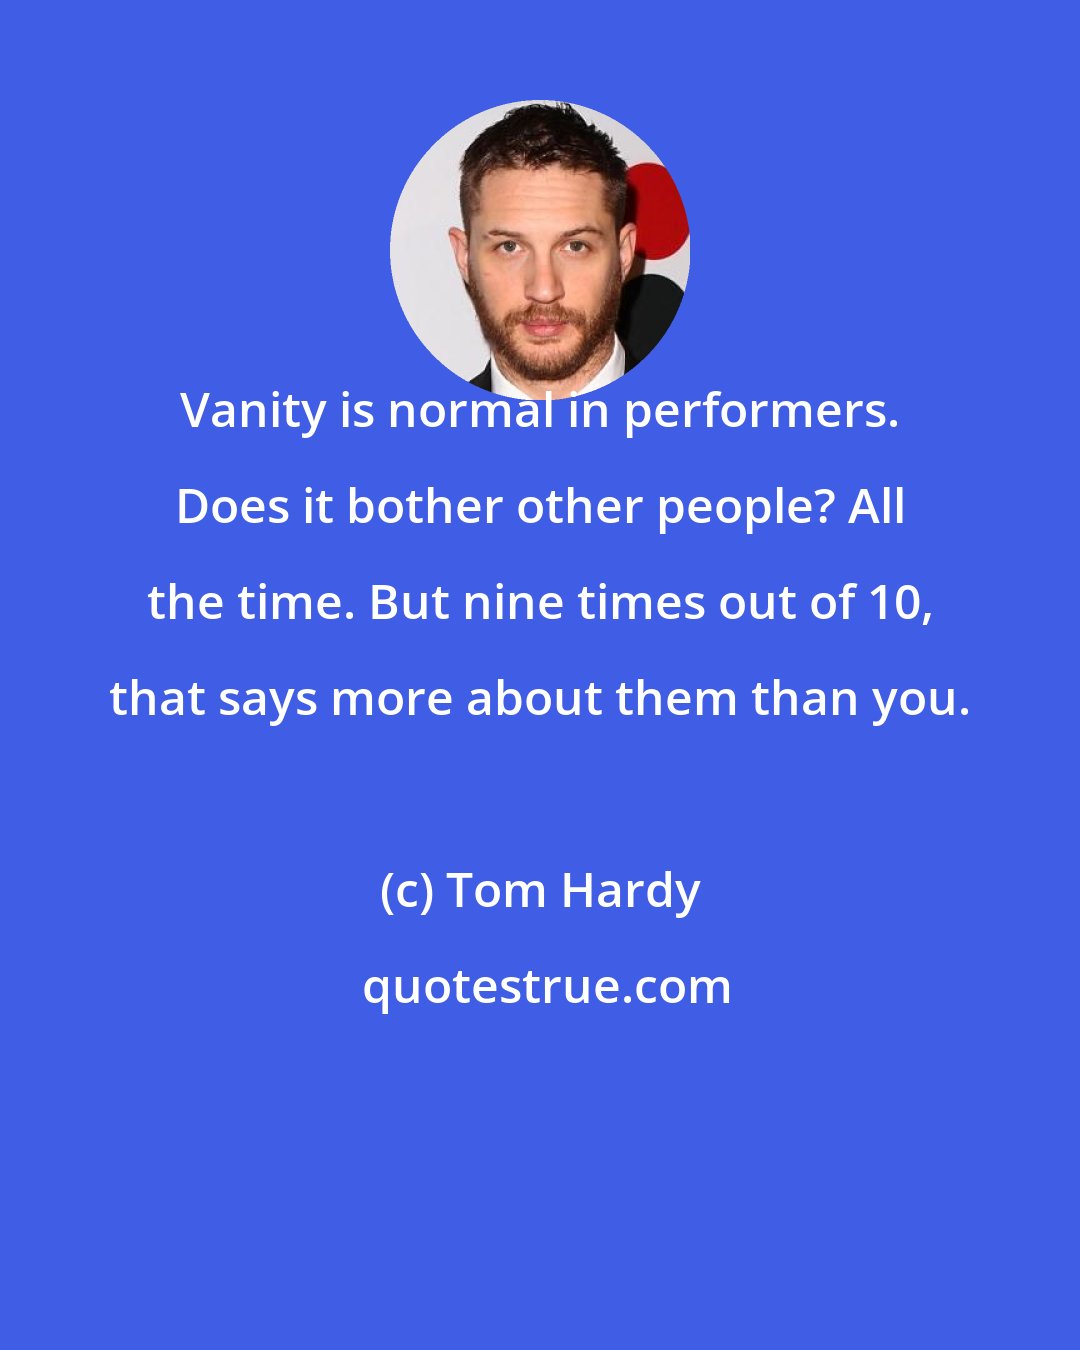 Tom Hardy: Vanity is normal in performers. Does it bother other people? All the time. But nine times out of 10, that says more about them than you.